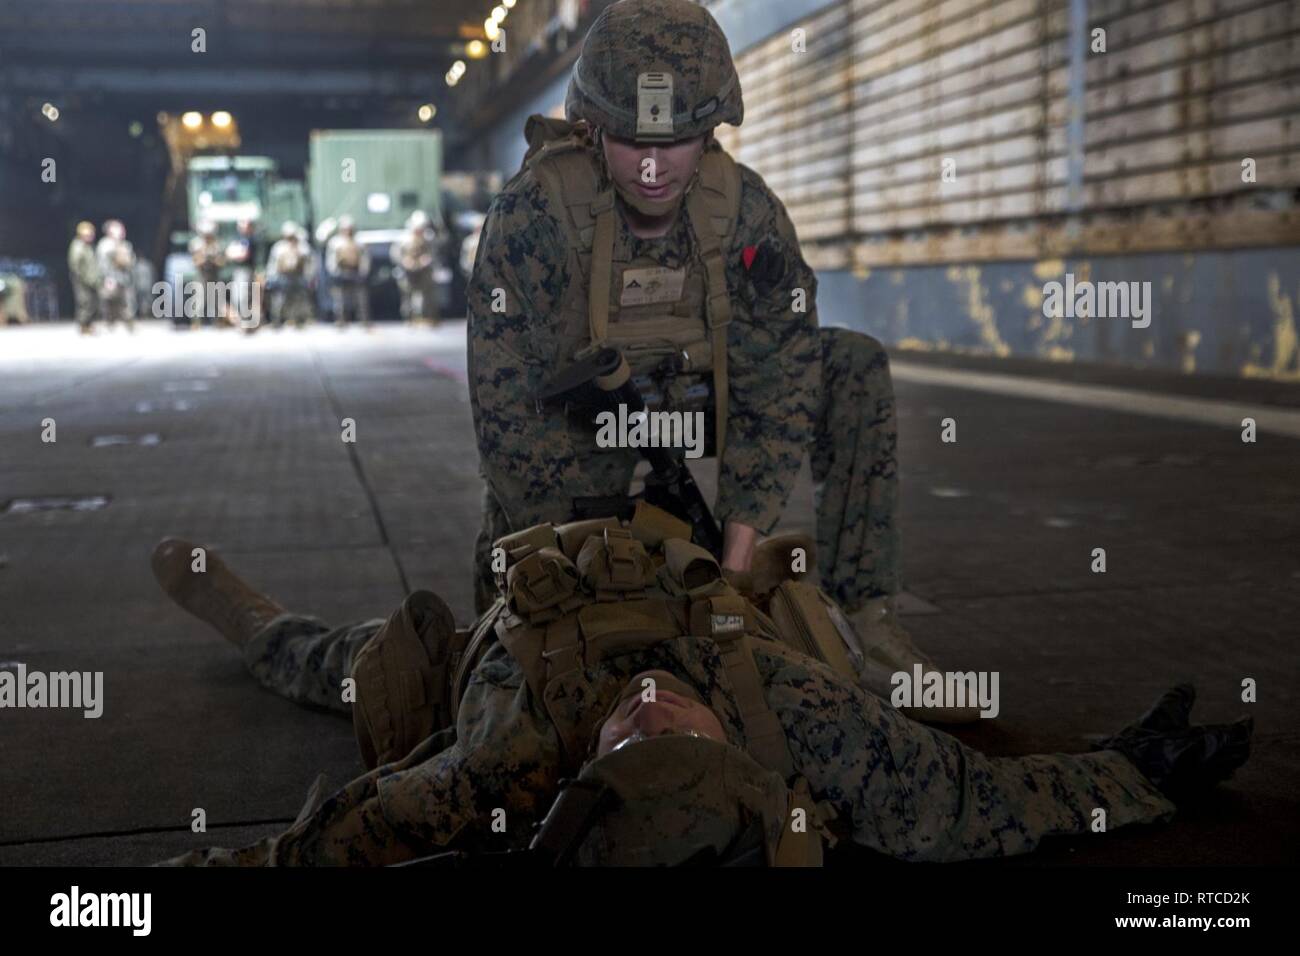 Lance Cpl. Dakota Weichers, a rifleman with Alpha Company, Battalion Landing Team, 1st Battalion, 4th Marines, practices lifesaving treatment during a Combat Lifesaver Course aboard the dock landing ship USS Ashland (LSD 48), East China Sea, Feb. 13, 2019. Weichers, a native of Kenosha, Wisconsin, graduated from Tremper High School in June 2017 before enlisting in June the same year. Alpha Company Marines are the small boat raid specialists for BLT 1/4, the Ground Combat Element for the 31st Marine Expeditionary Unit. The 31st MEU, the Marine Corps’ only continuously forward-deployed MEU partn Stock Photo